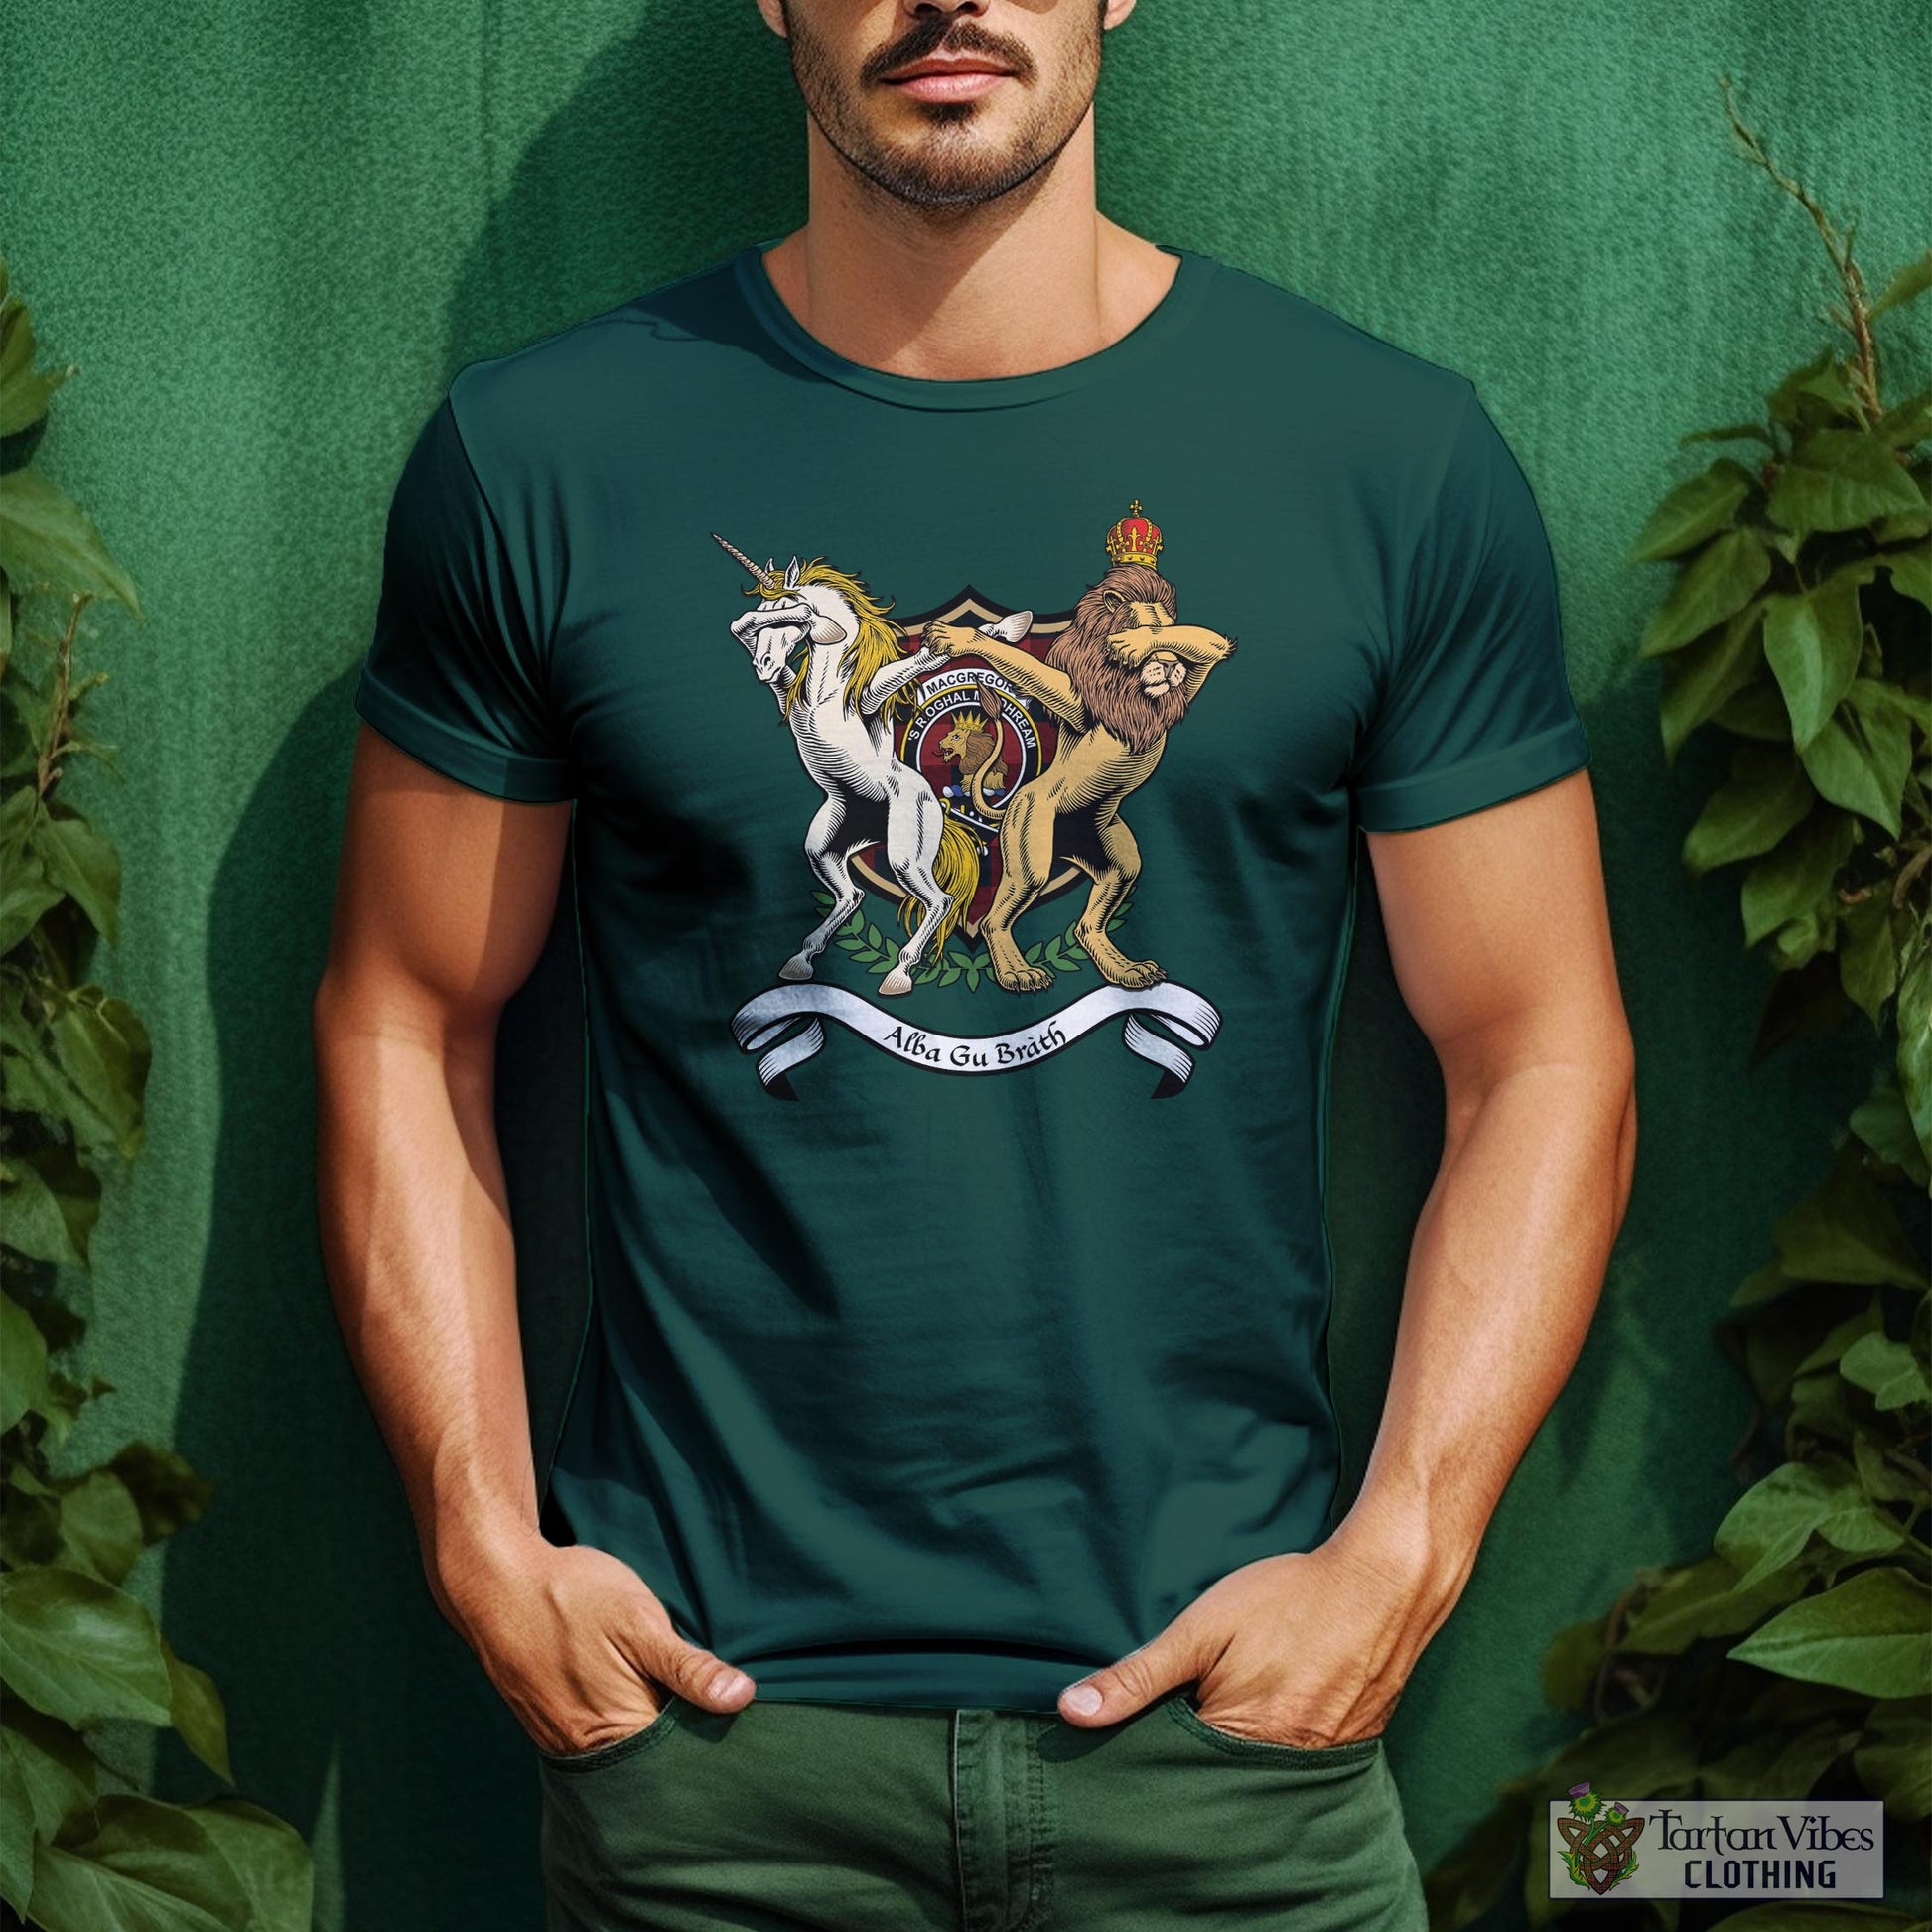 Tartan Vibes Clothing Rob Roy Macgregor Family Crest Cotton Men's T-Shirt with Scotland Royal Coat Of Arm Funny Style